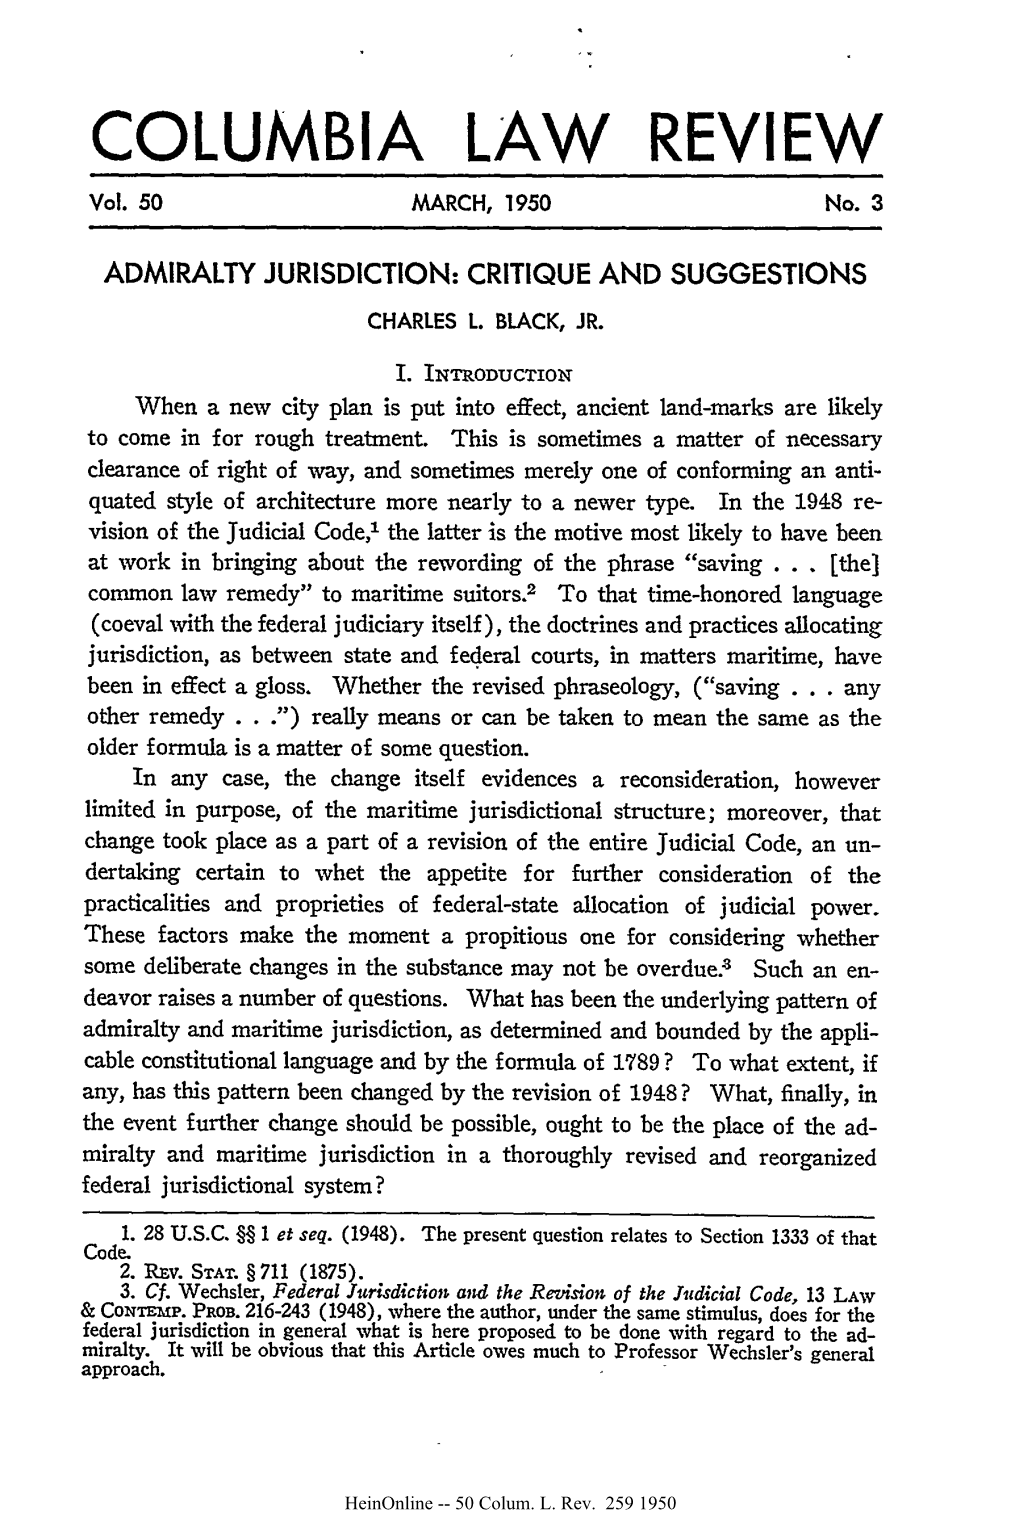 Admiralty Jurisdiction: Critique and Suggestions Charles L